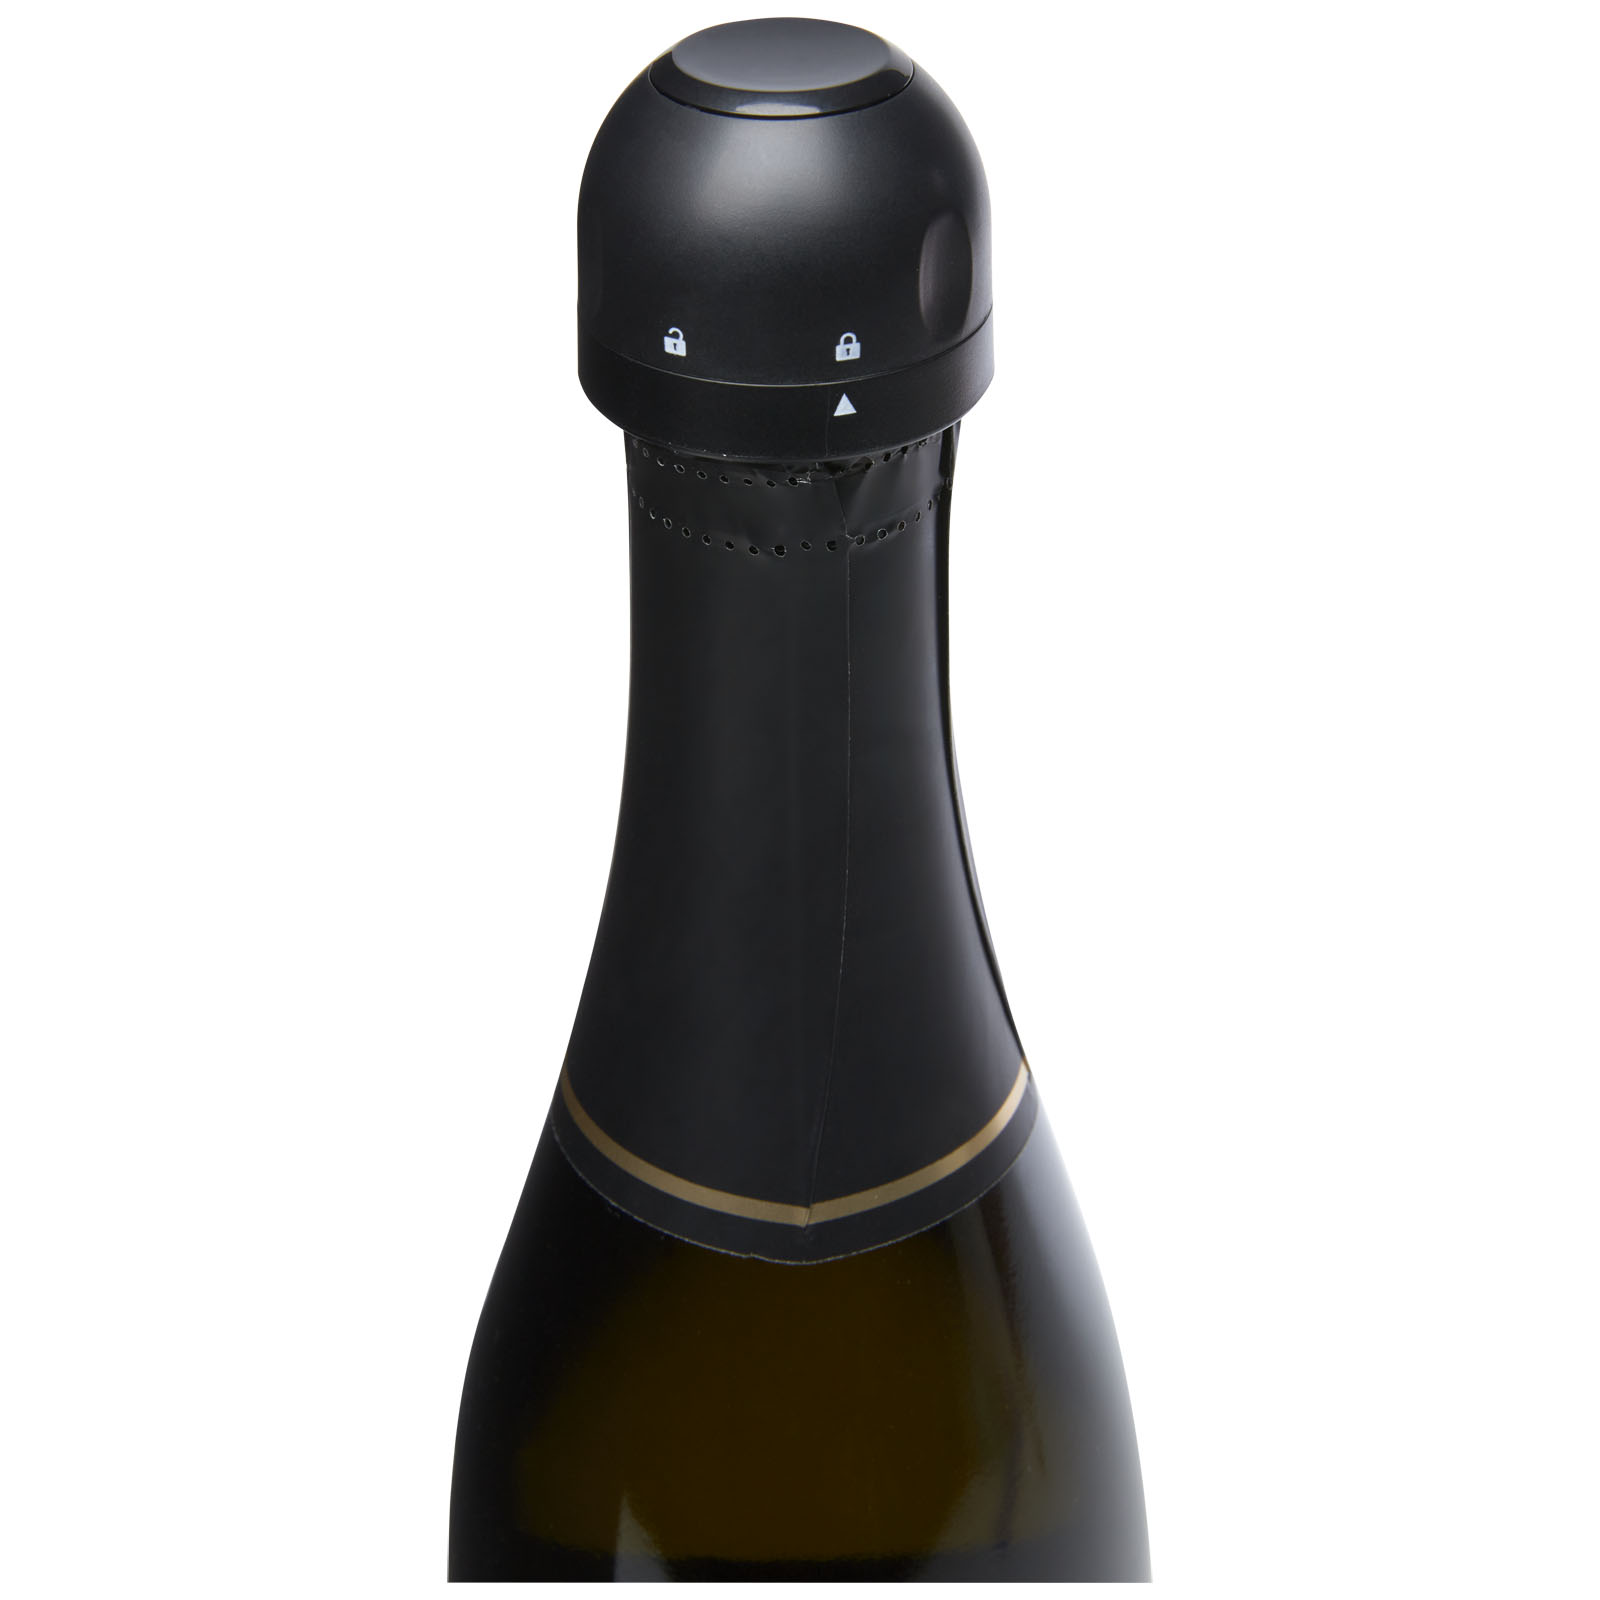 Advertising Wine Accessories - Arb champagne stopper - 3